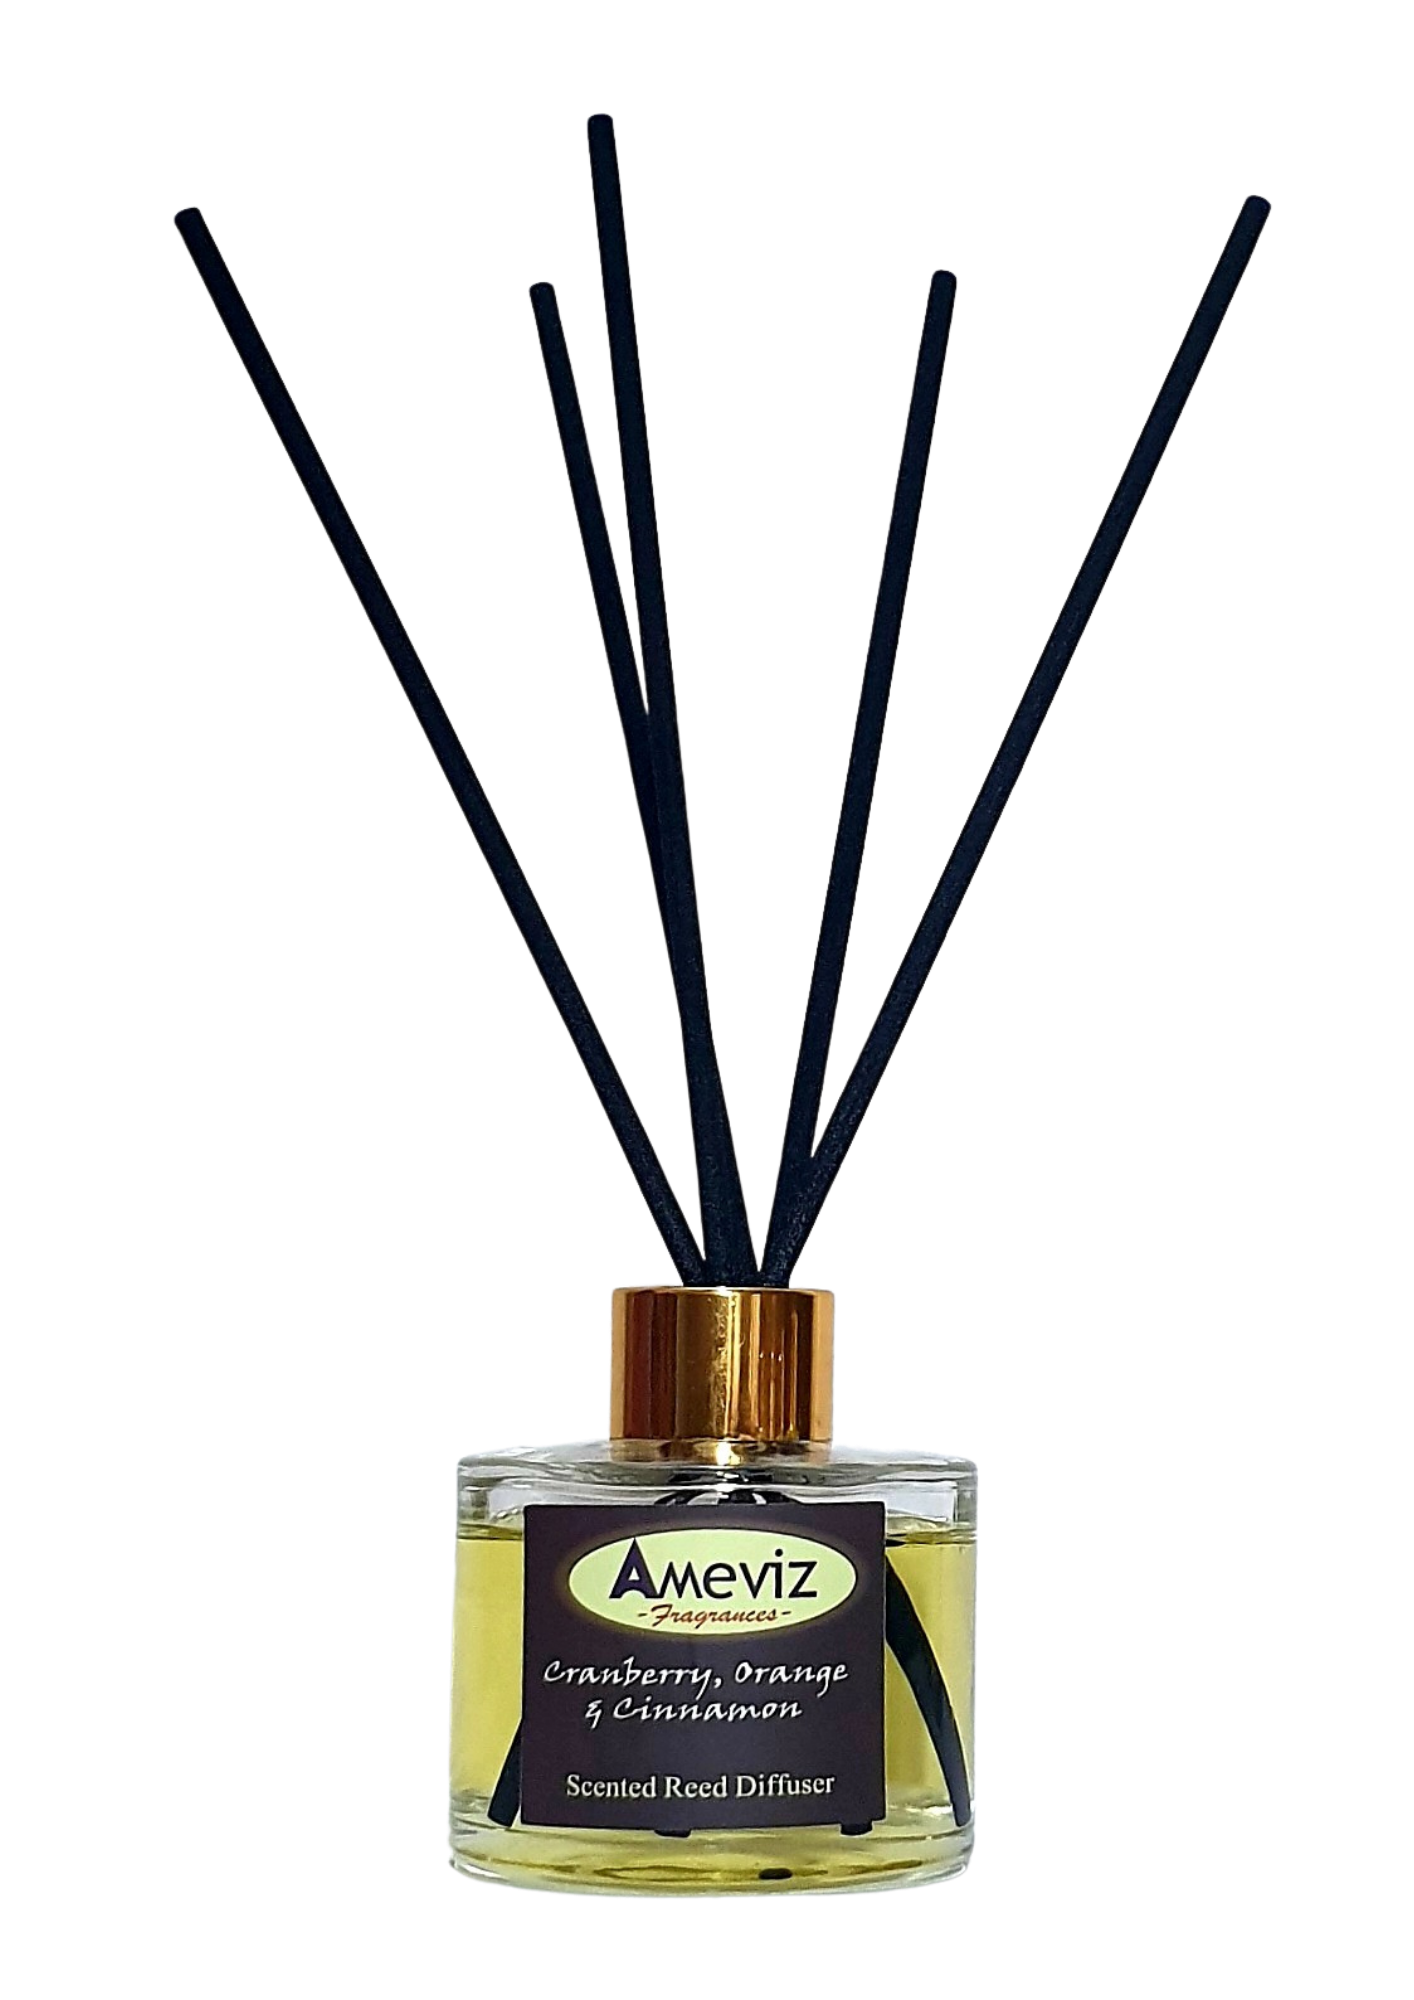 100ML LUXURY HOME SCENTED REED DIFFUSER x 12